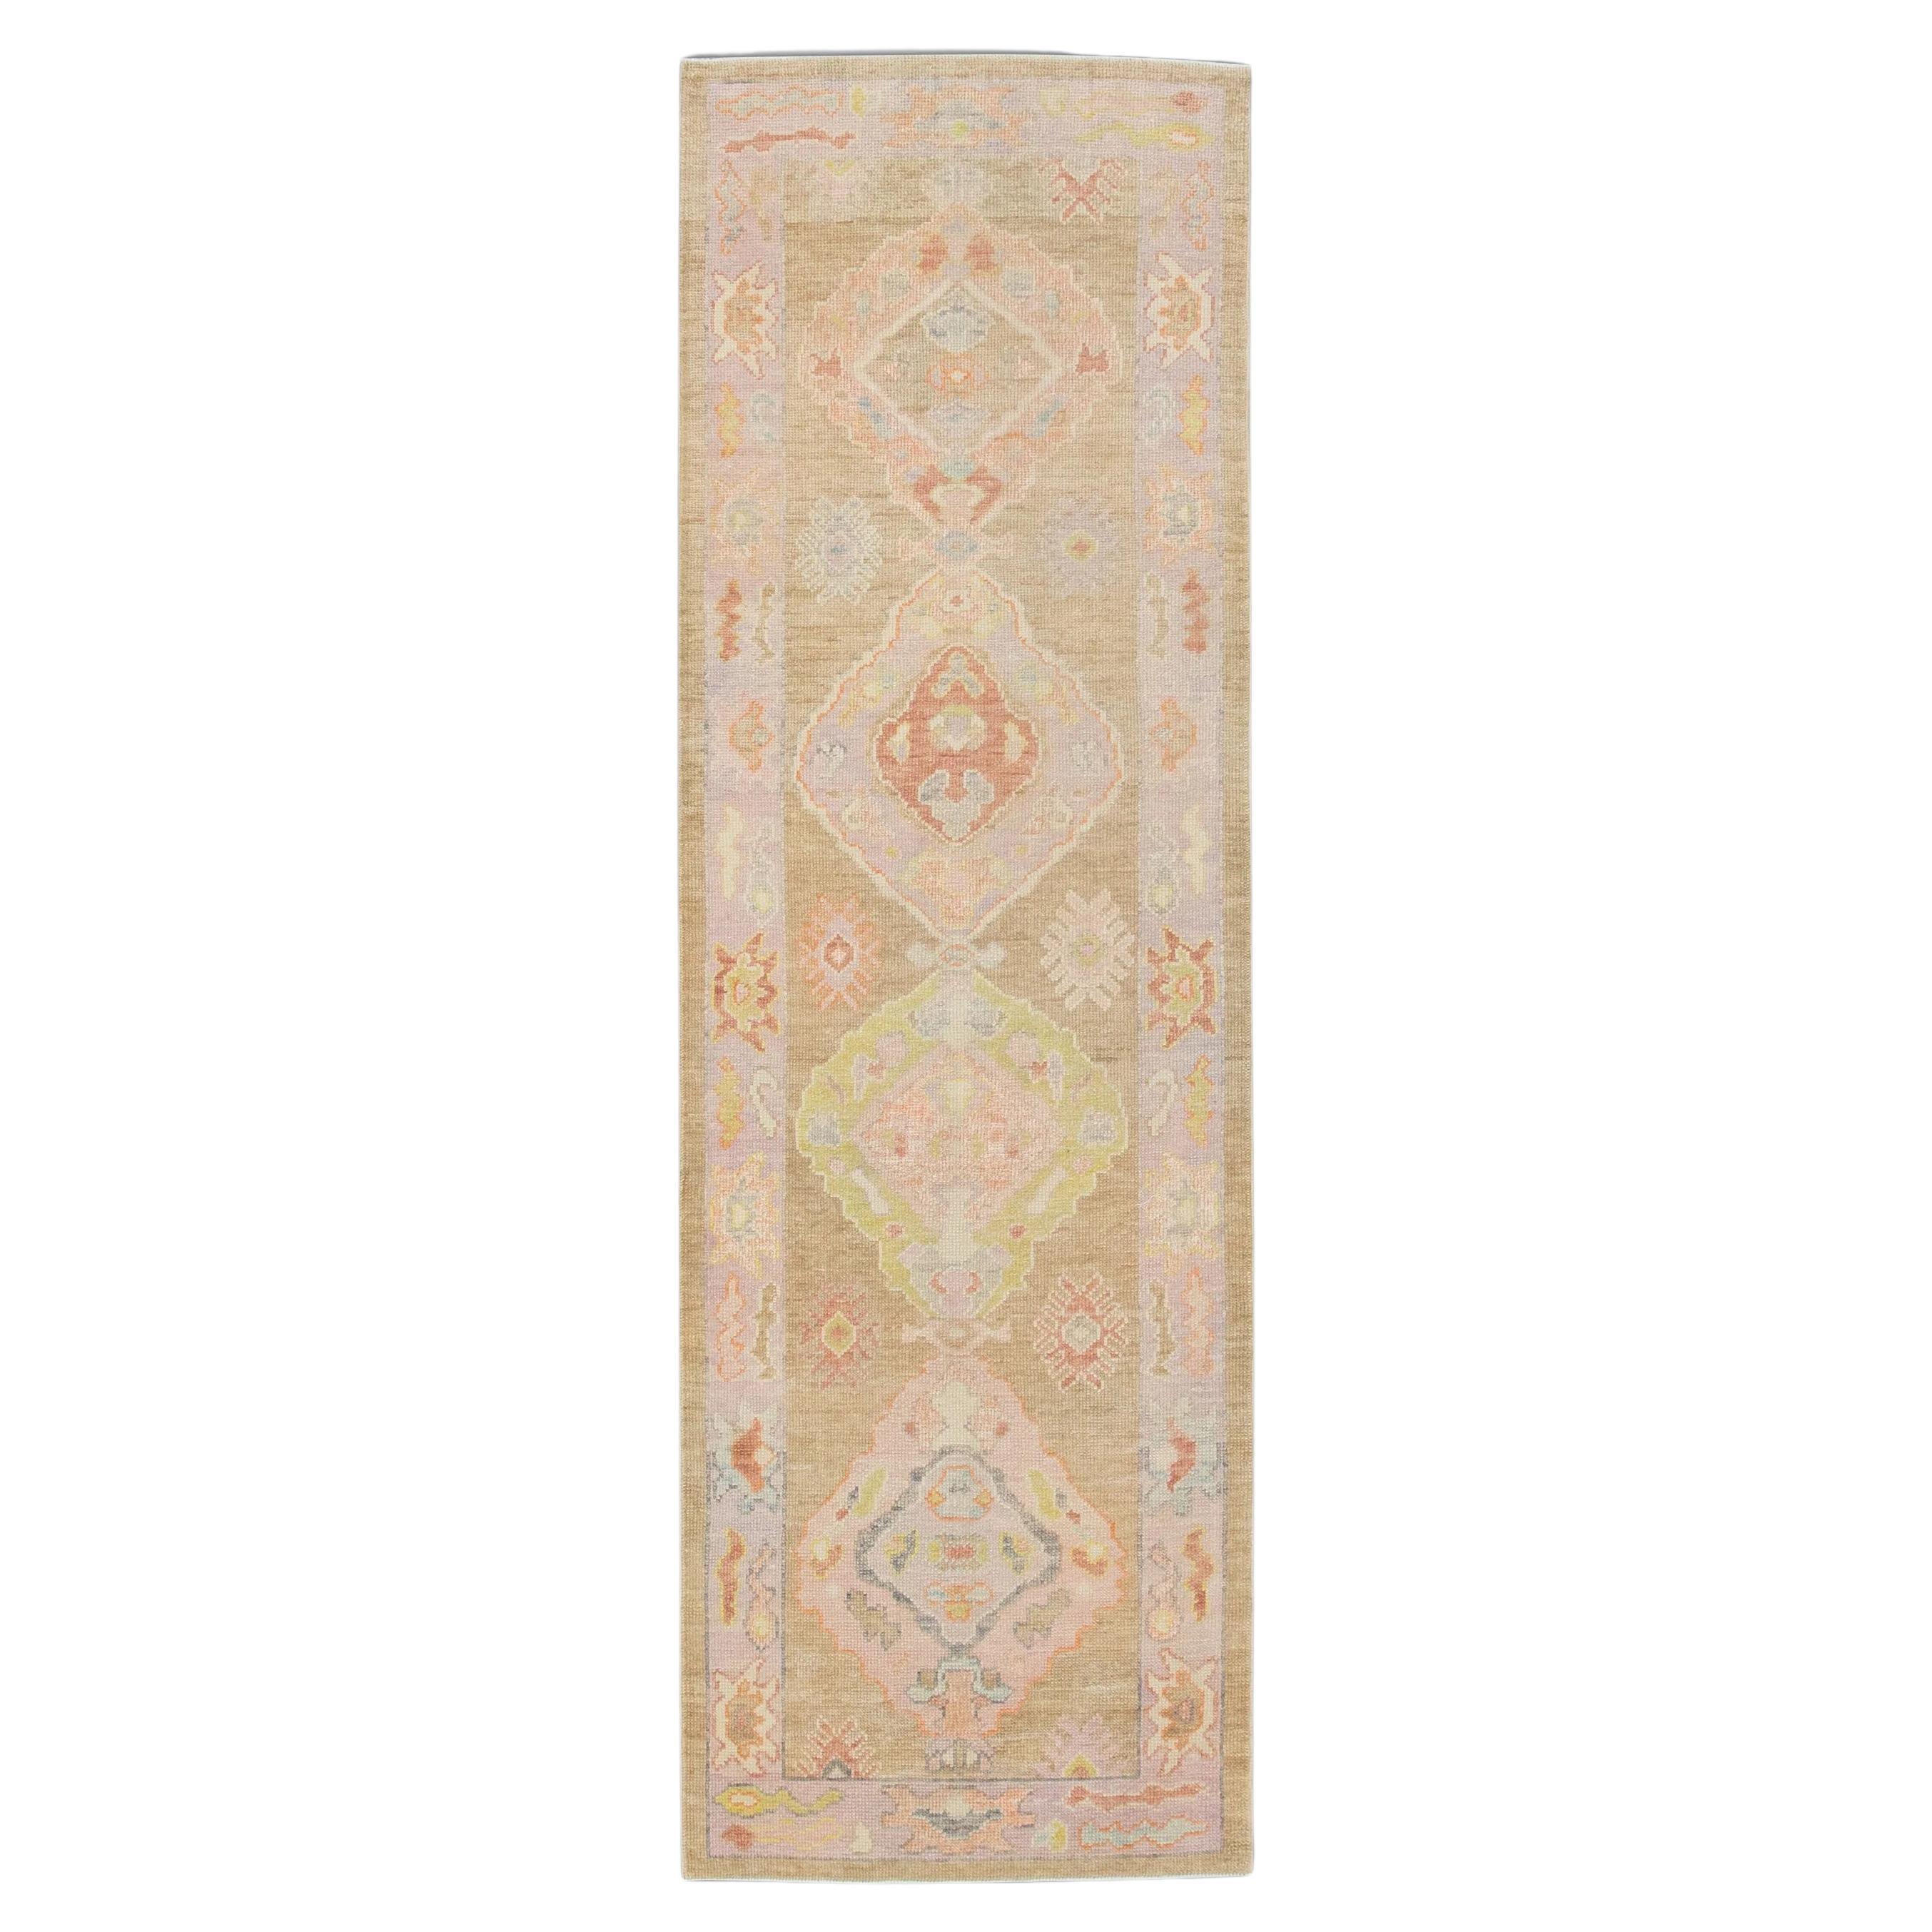 Colorful Handwoven Wool Turkish Oushak Rug with Pink Floral Design 3' x 9'6"